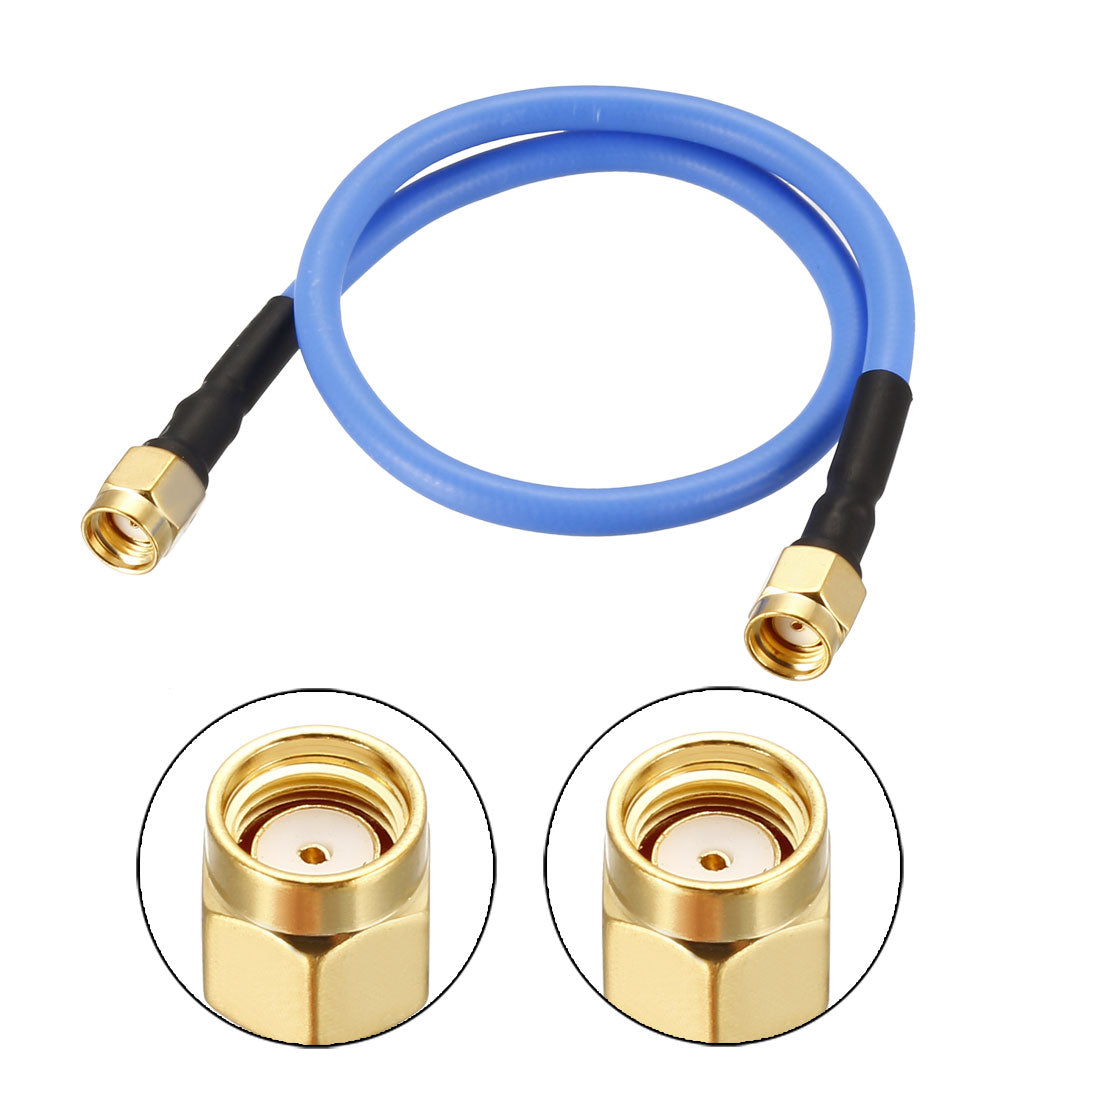 uxcell Uxcell RP-SMA Male to RP-SMA Male RG402 RF Coaxial Coax Cable 0.3Meter/1Ft